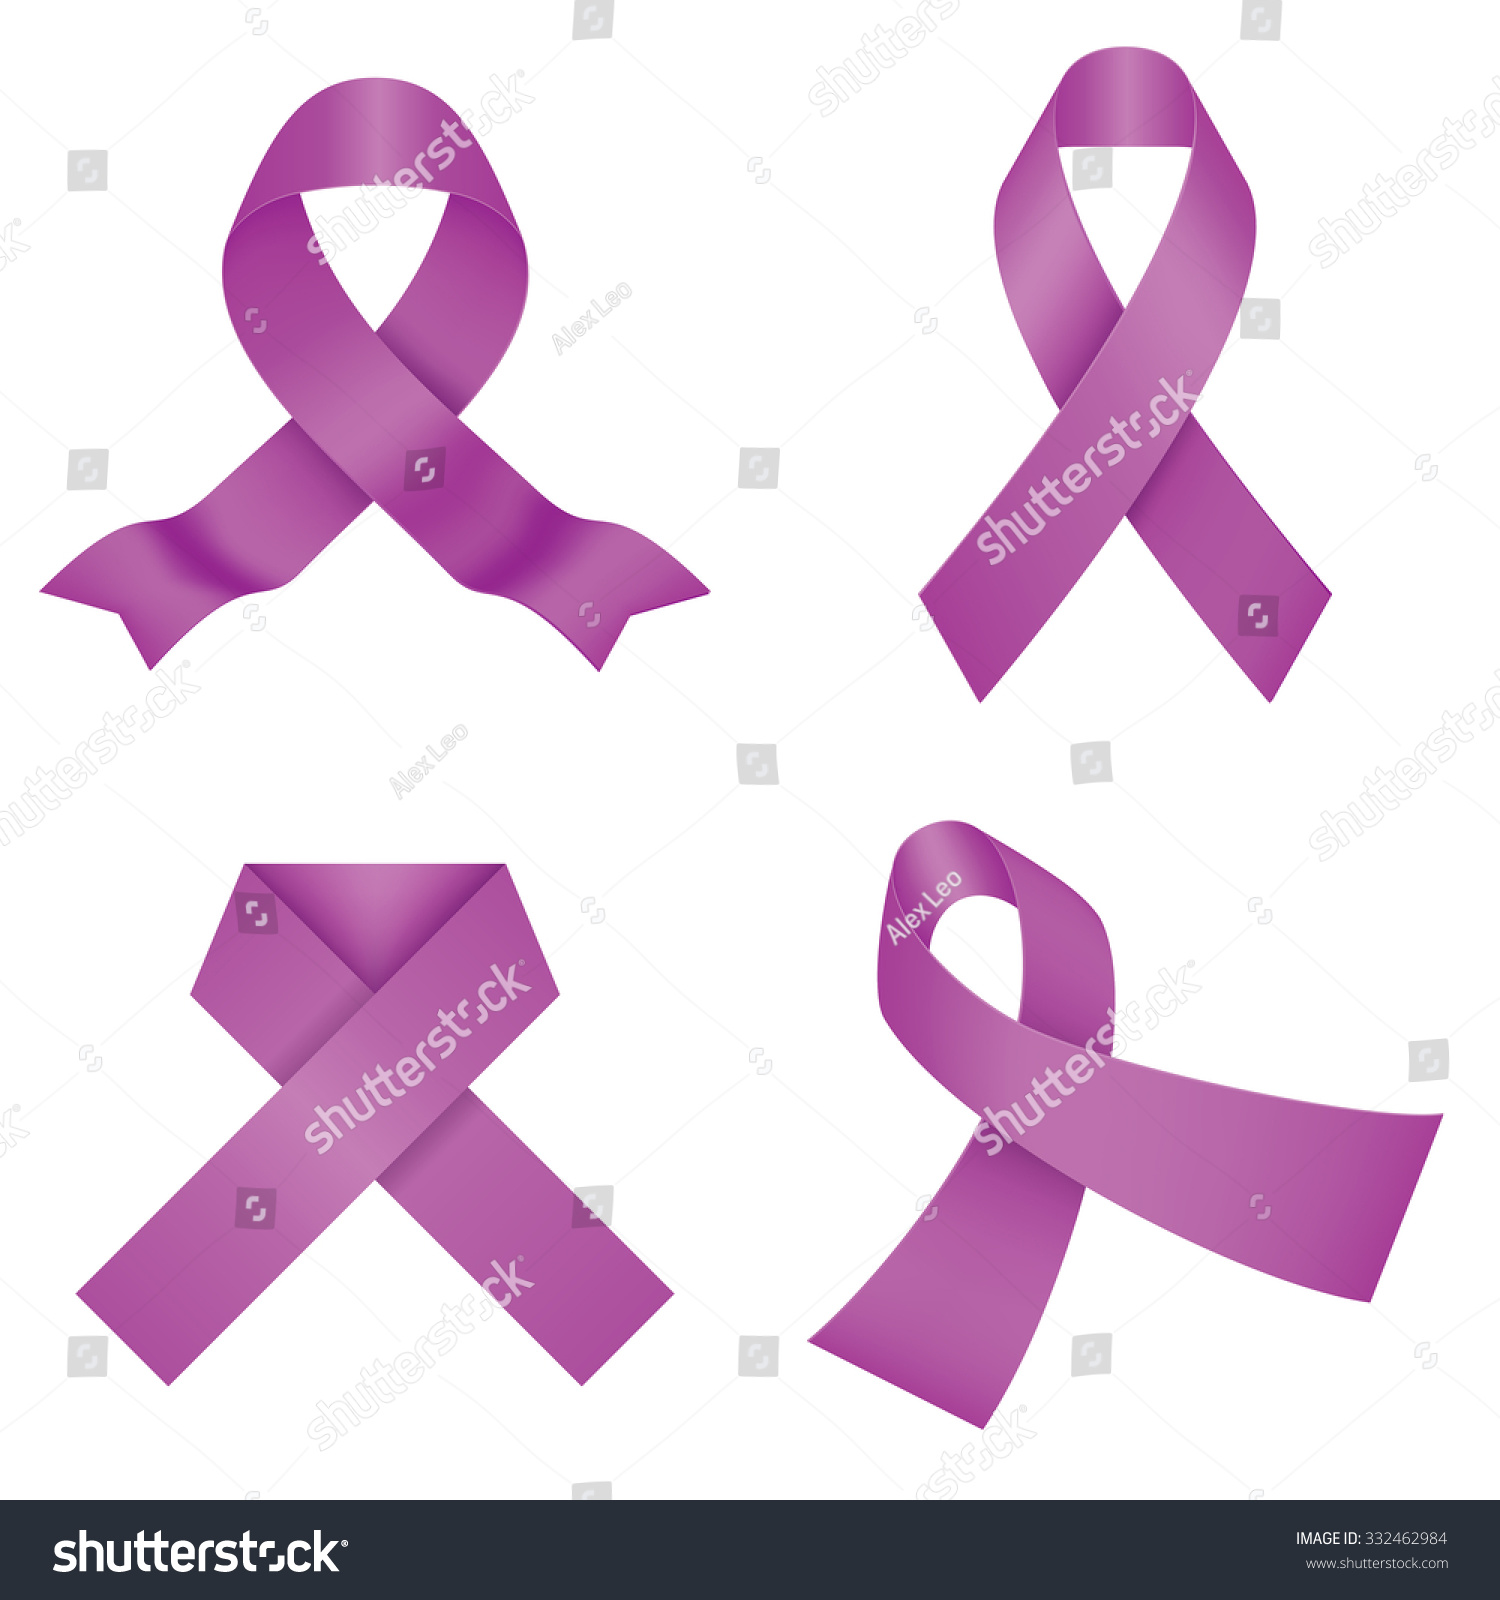 SVG of Purple awareness ribbons isolated on a white background. Vector illustration svg